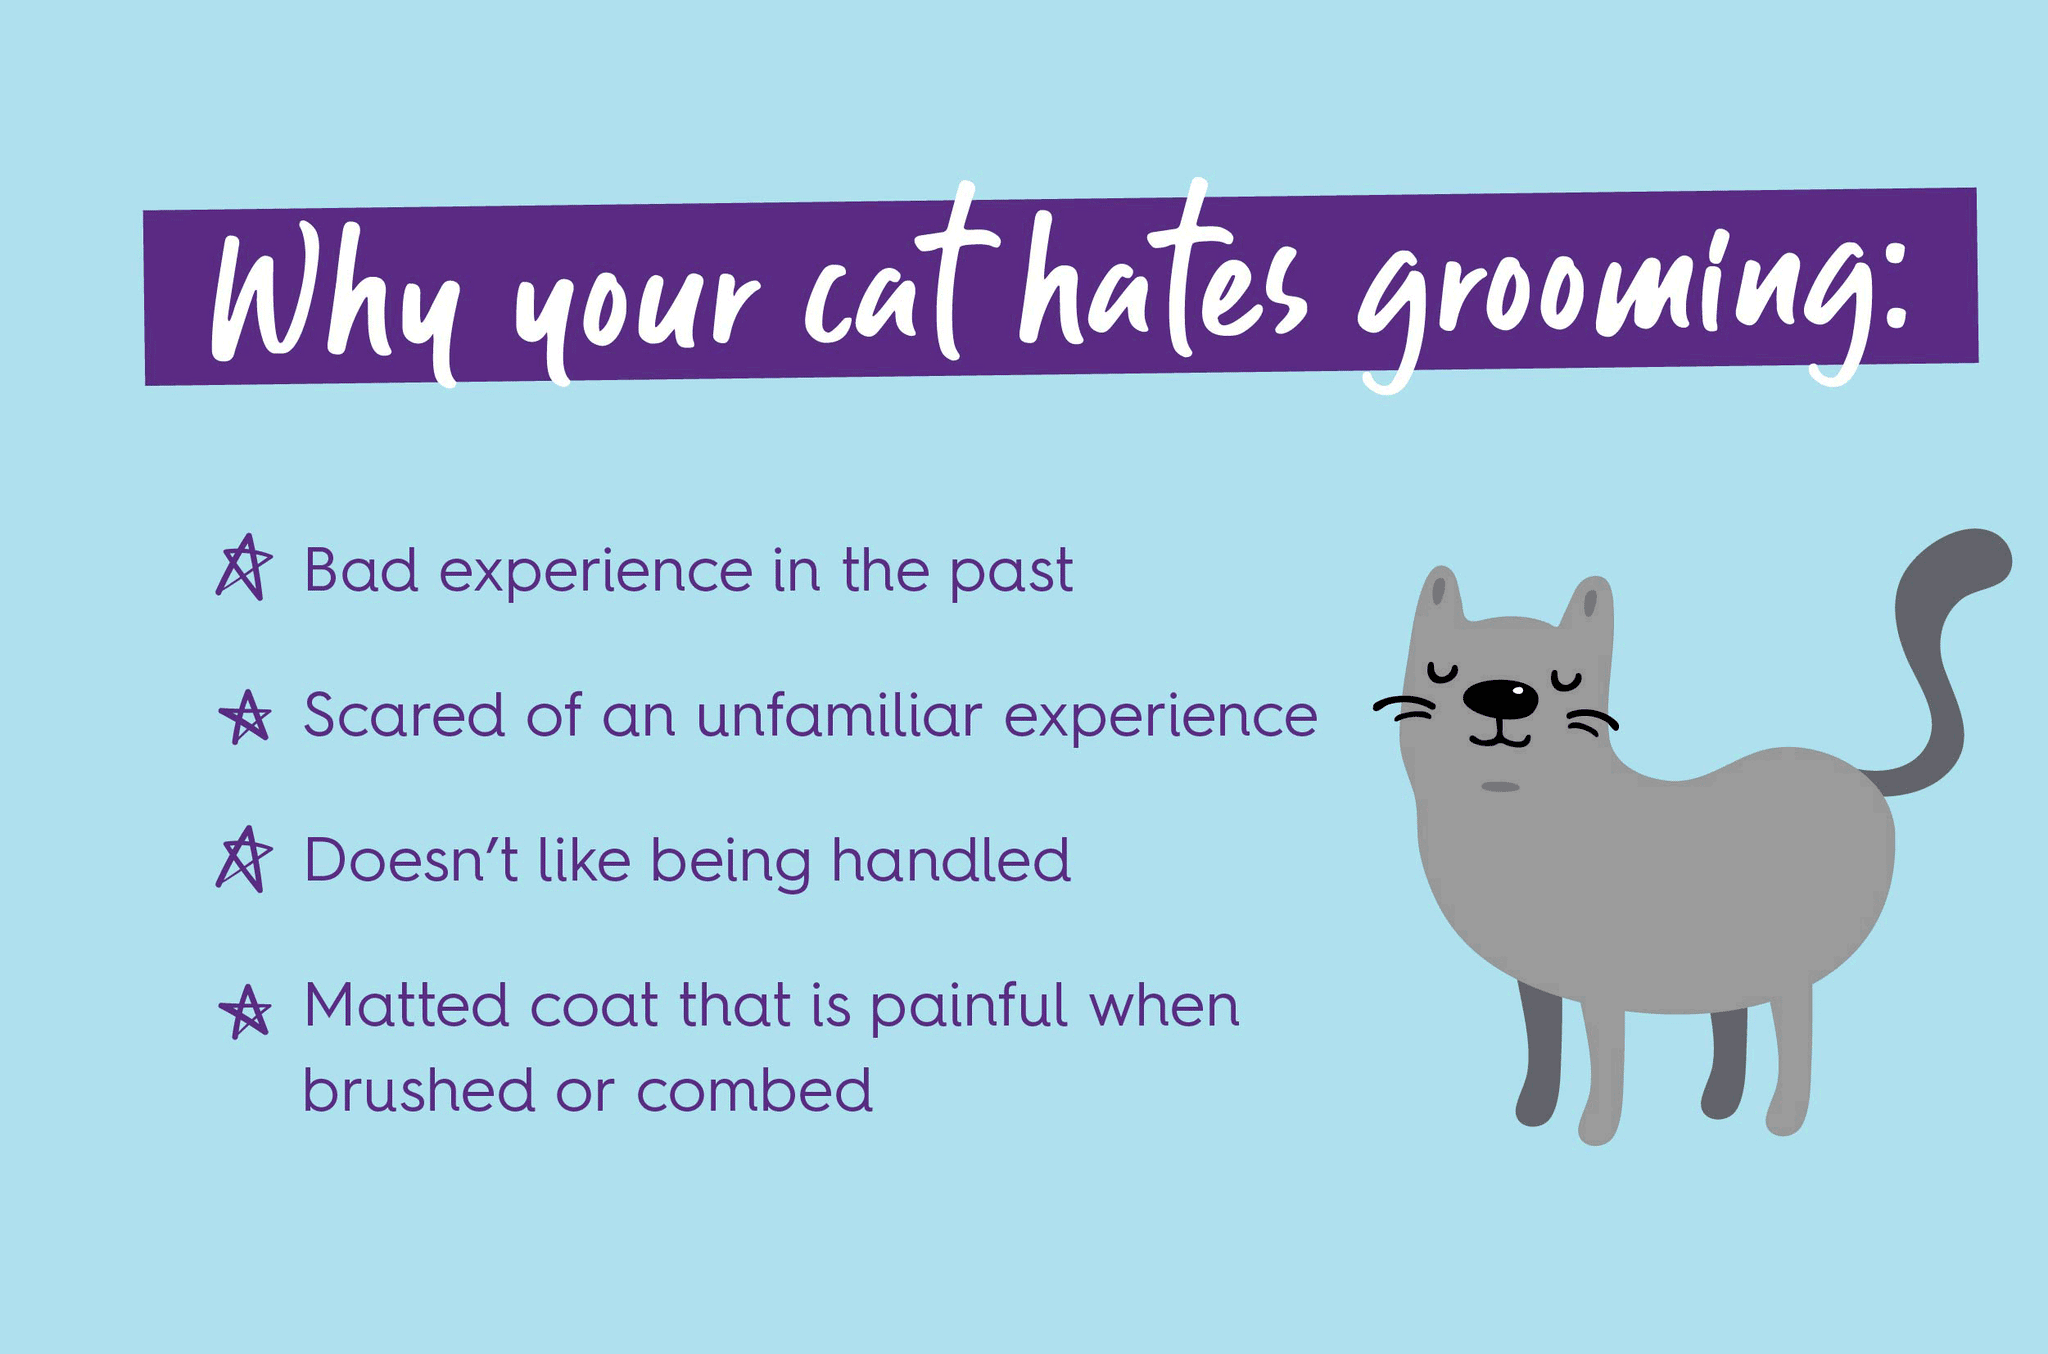 Why your cat hates grooming